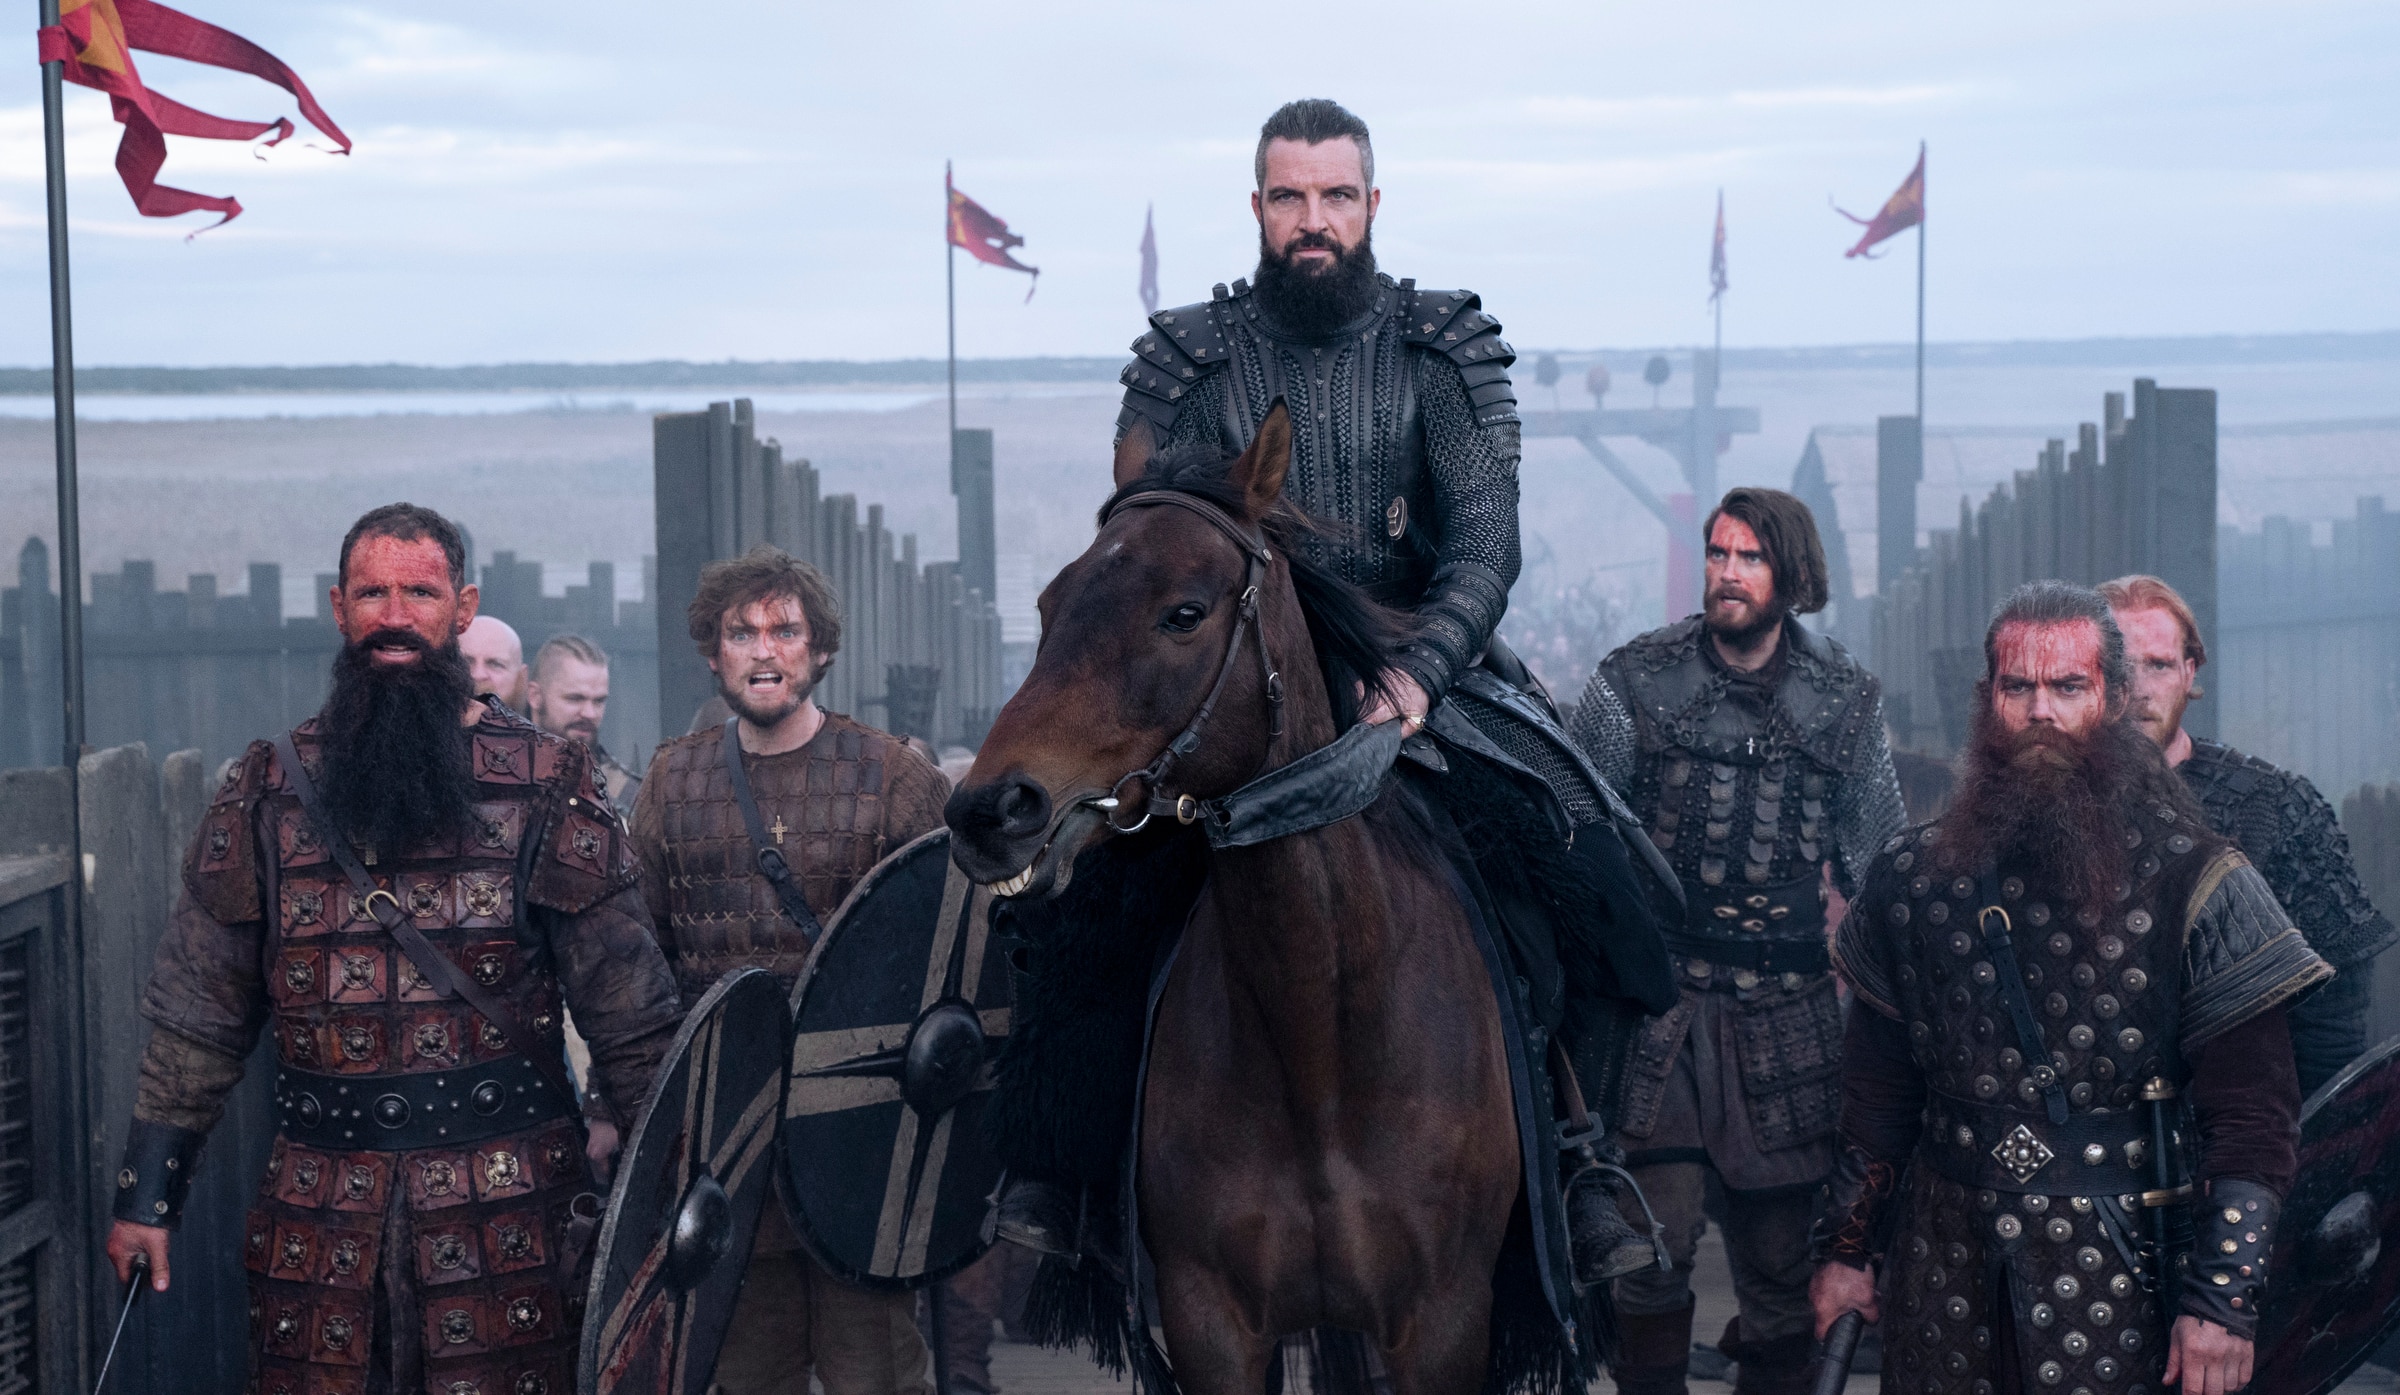 Vikings' Sequel Series Moves From History to Netflix – The